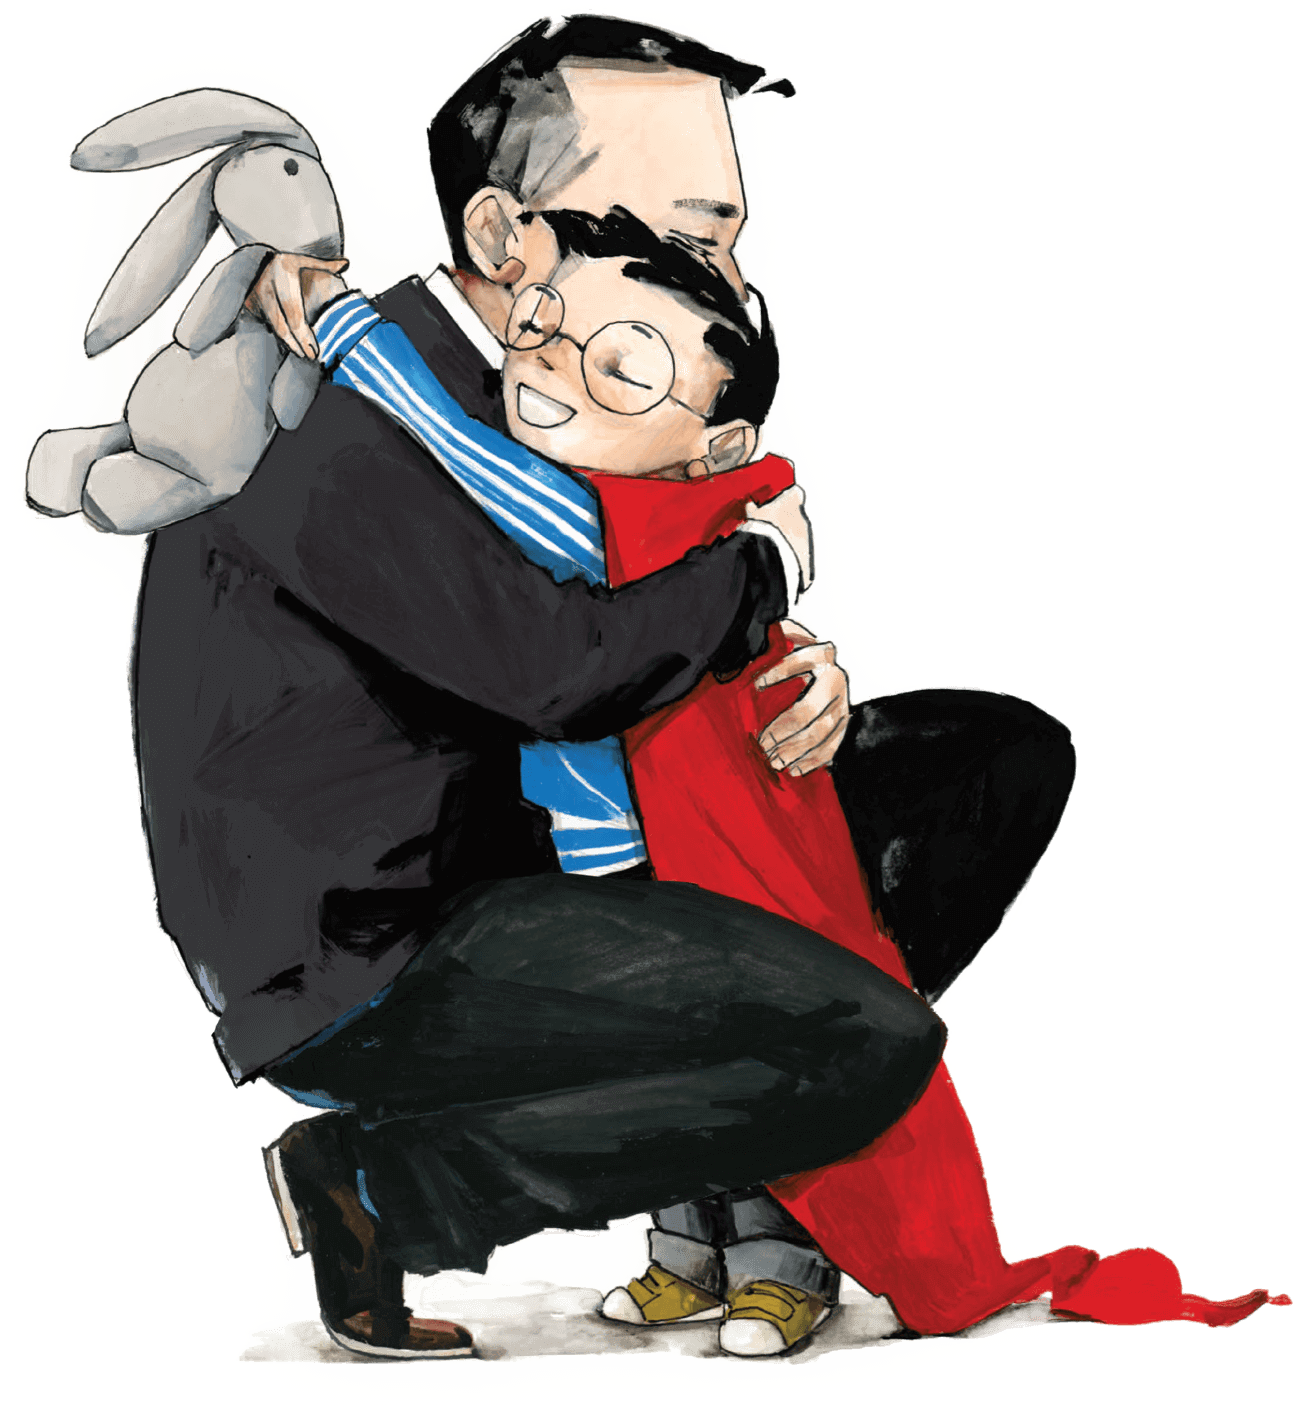 Illustration of a man in business attire hugging his young son